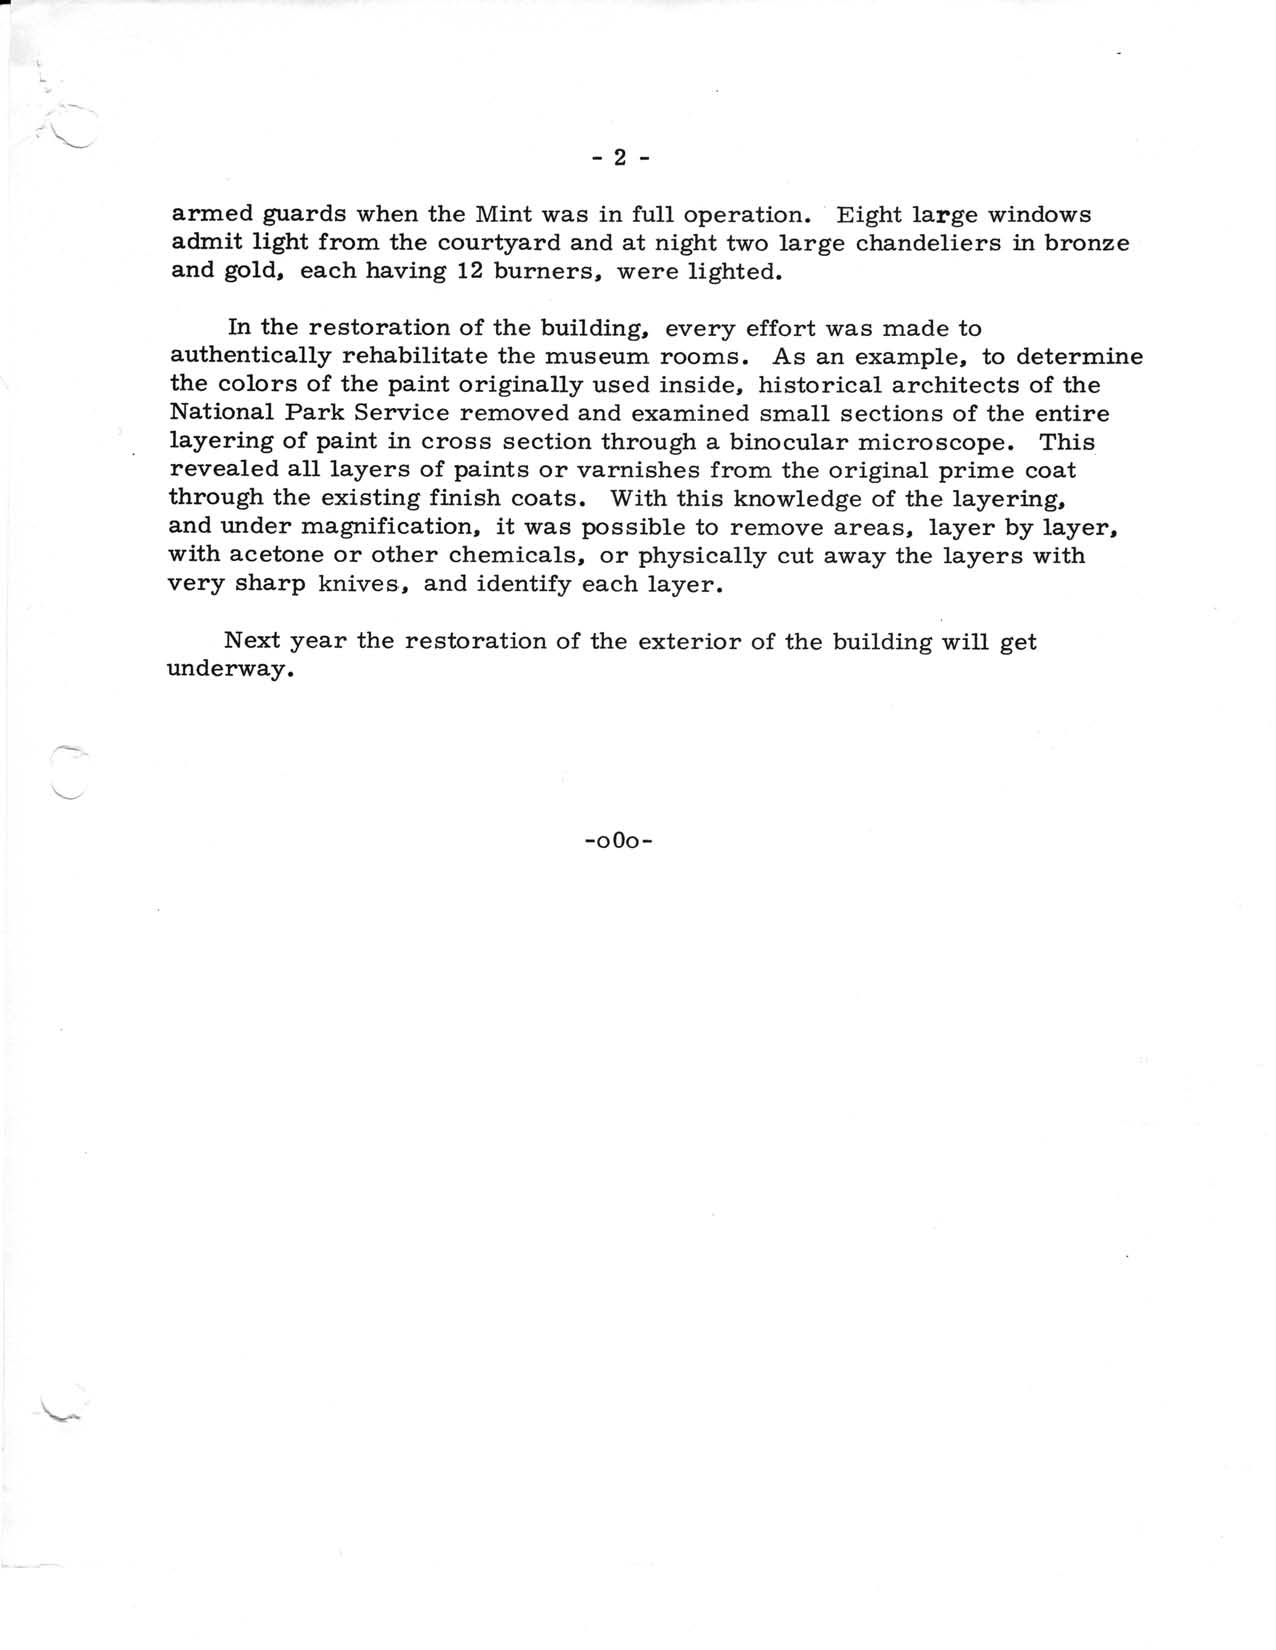 Historic Press Release: Old Mint San Francisco, Page 2